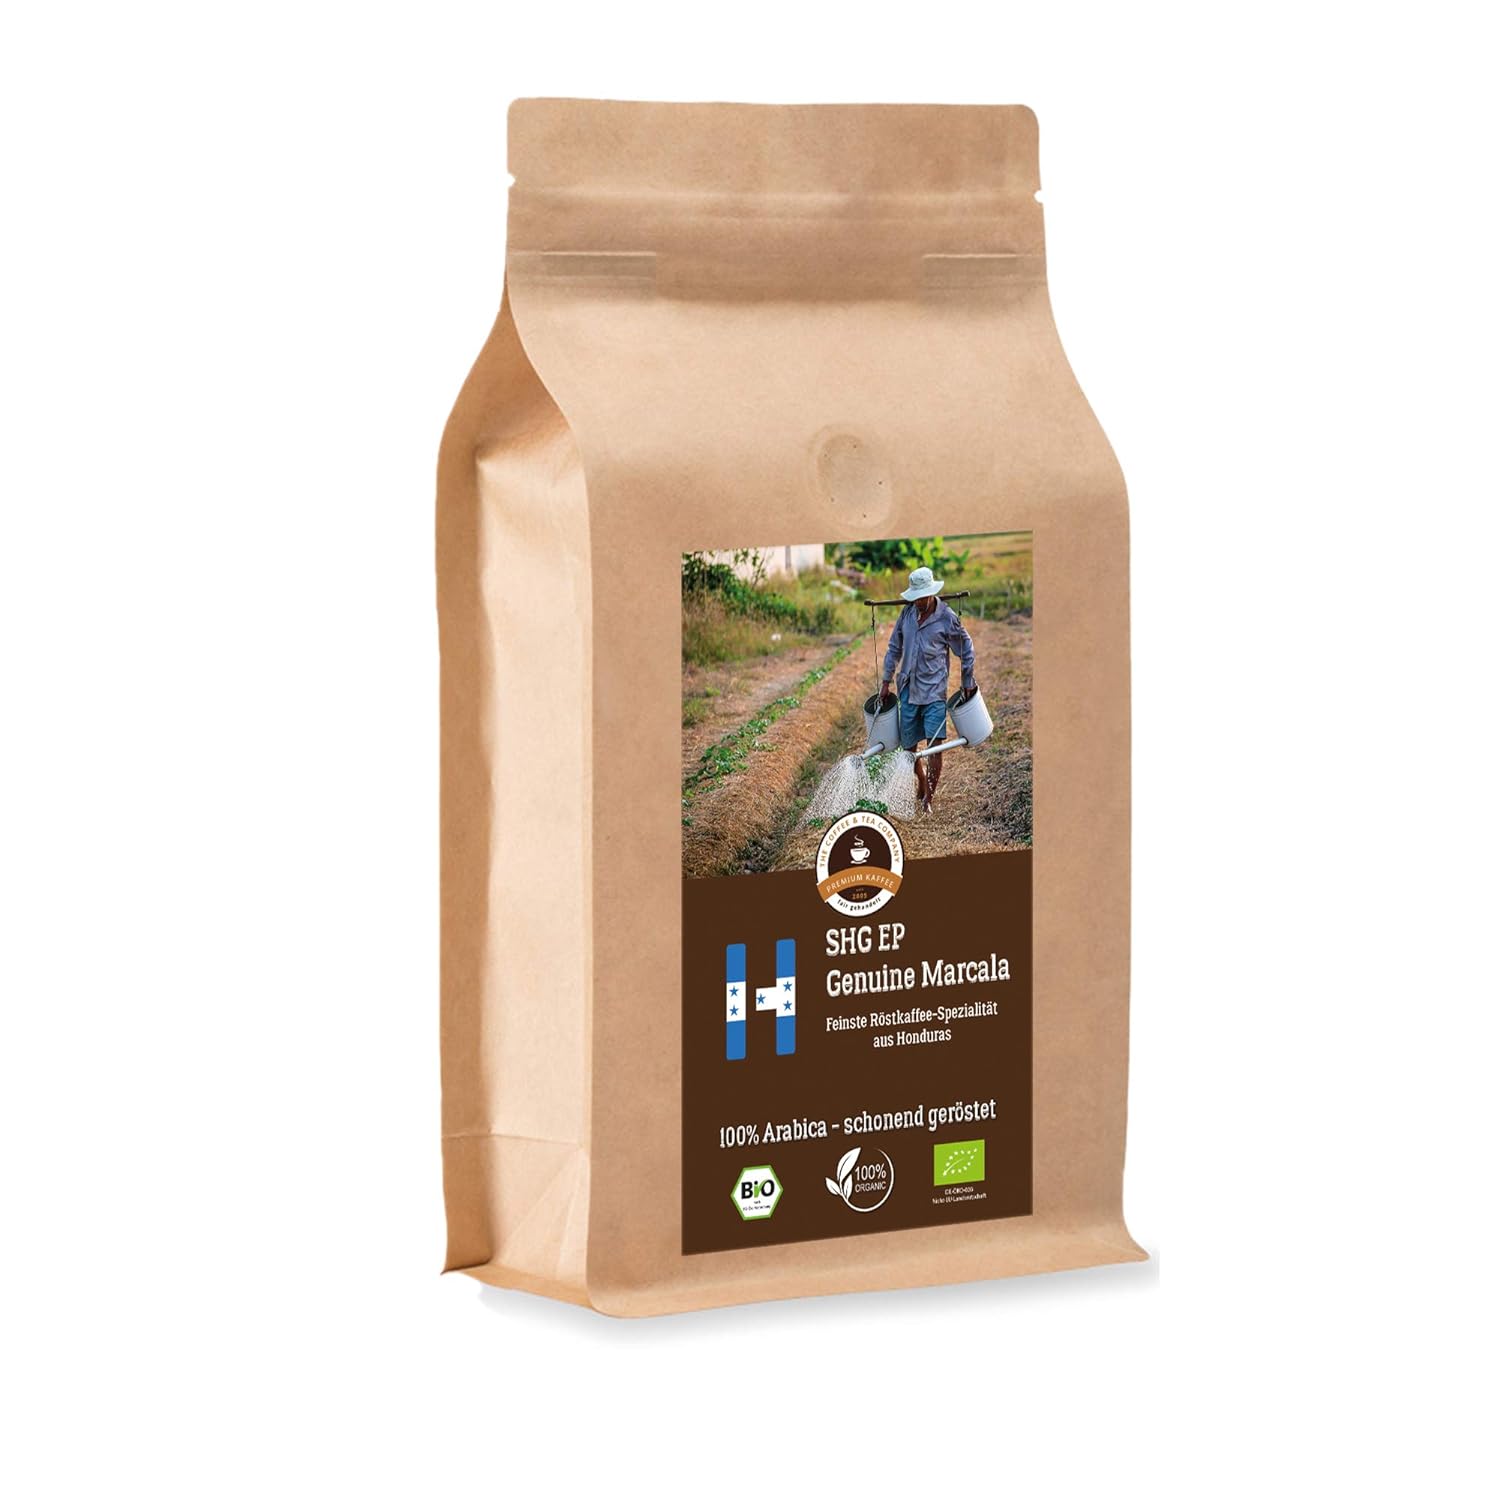 Coffee Globetrotter - Organic Honduras Genuine Marcala - 500 g Whole Bean - for Fully Automatic Coffee Machine, Coffee Grinder, Hand Mill, Top Coffee - Roasted Coffee from Organic Cultivation